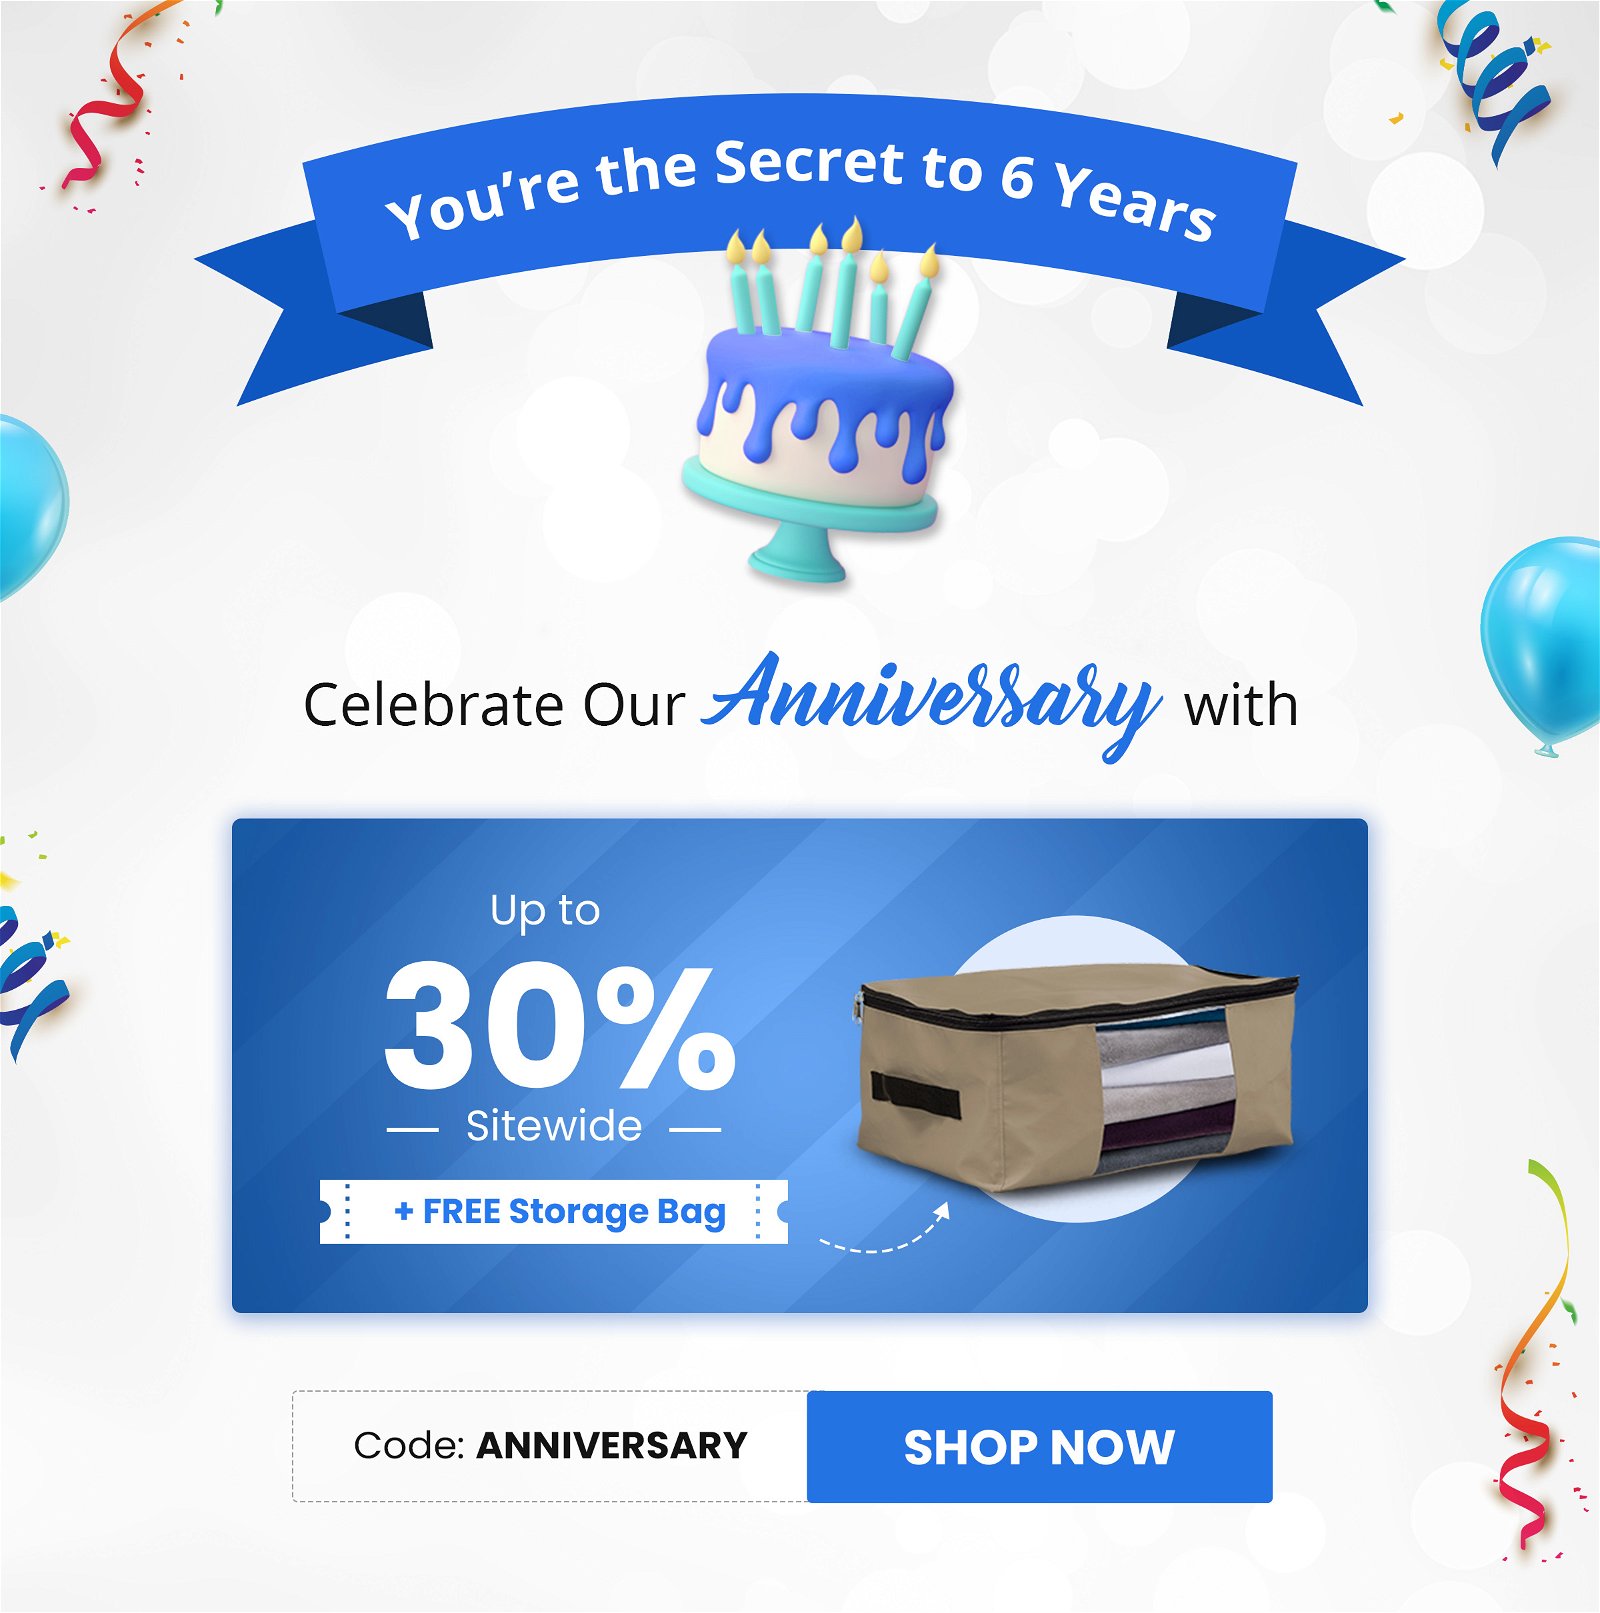 You're the Secret to 6 Years Up To 30% Sitewide